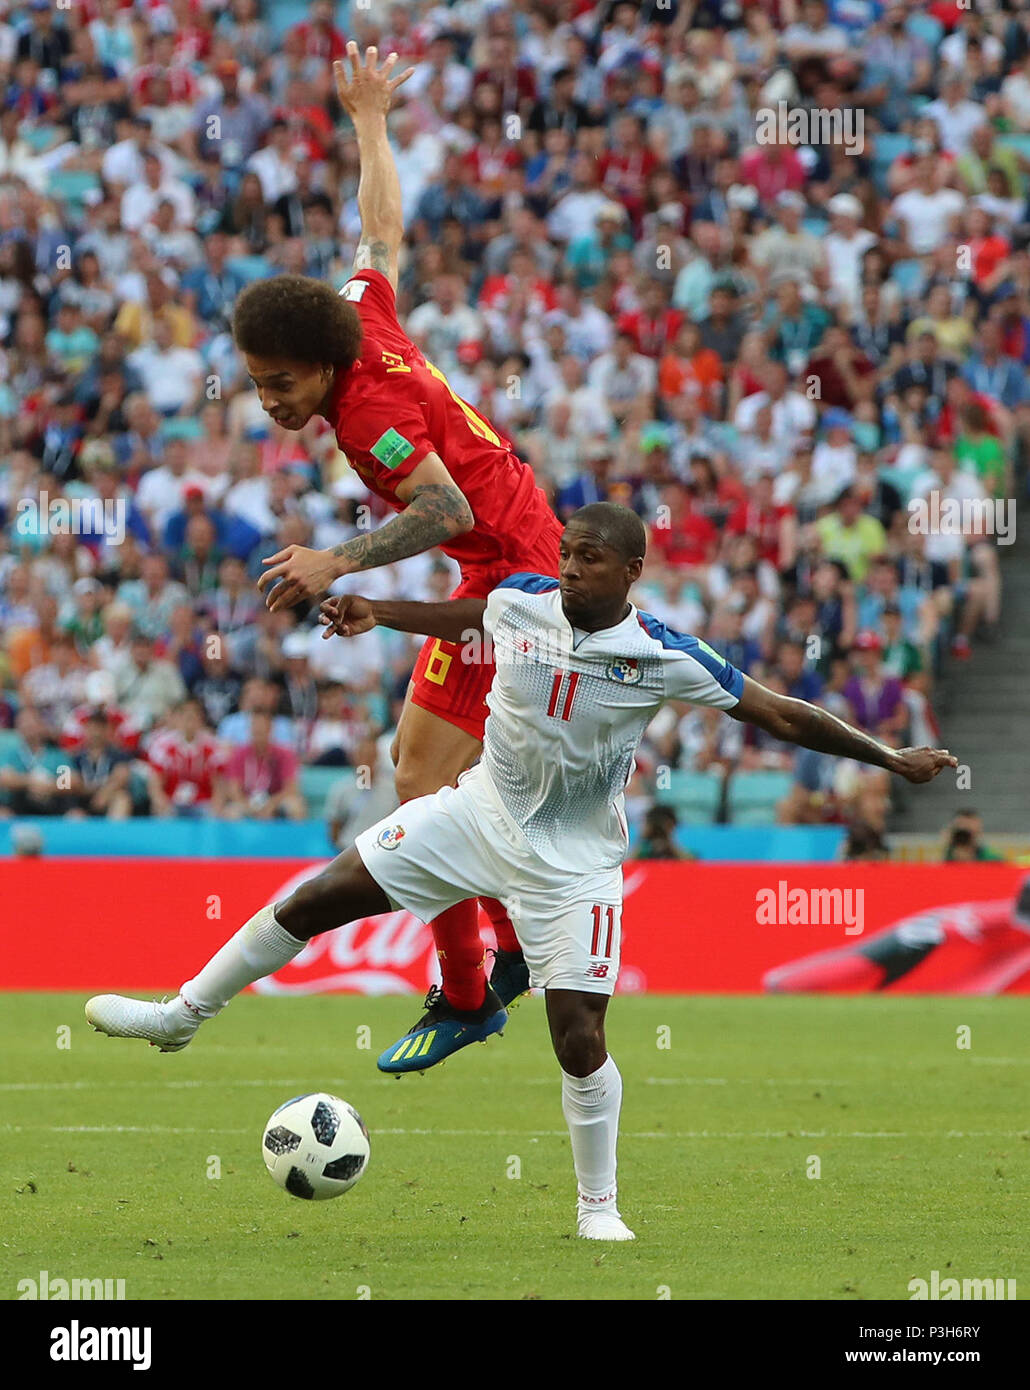 Sochi, Russia. 18th June, 2018. Axel Witsel (top) of Belgium vies with Armando Cooper of Panama during a group G match between Belgium and Panama at the 2018 FIFA World Cup in Sochi, Russia, June 18, 2018. Credit: Bai Xueqi/Xinhua/Alamy Live News Stock Photo